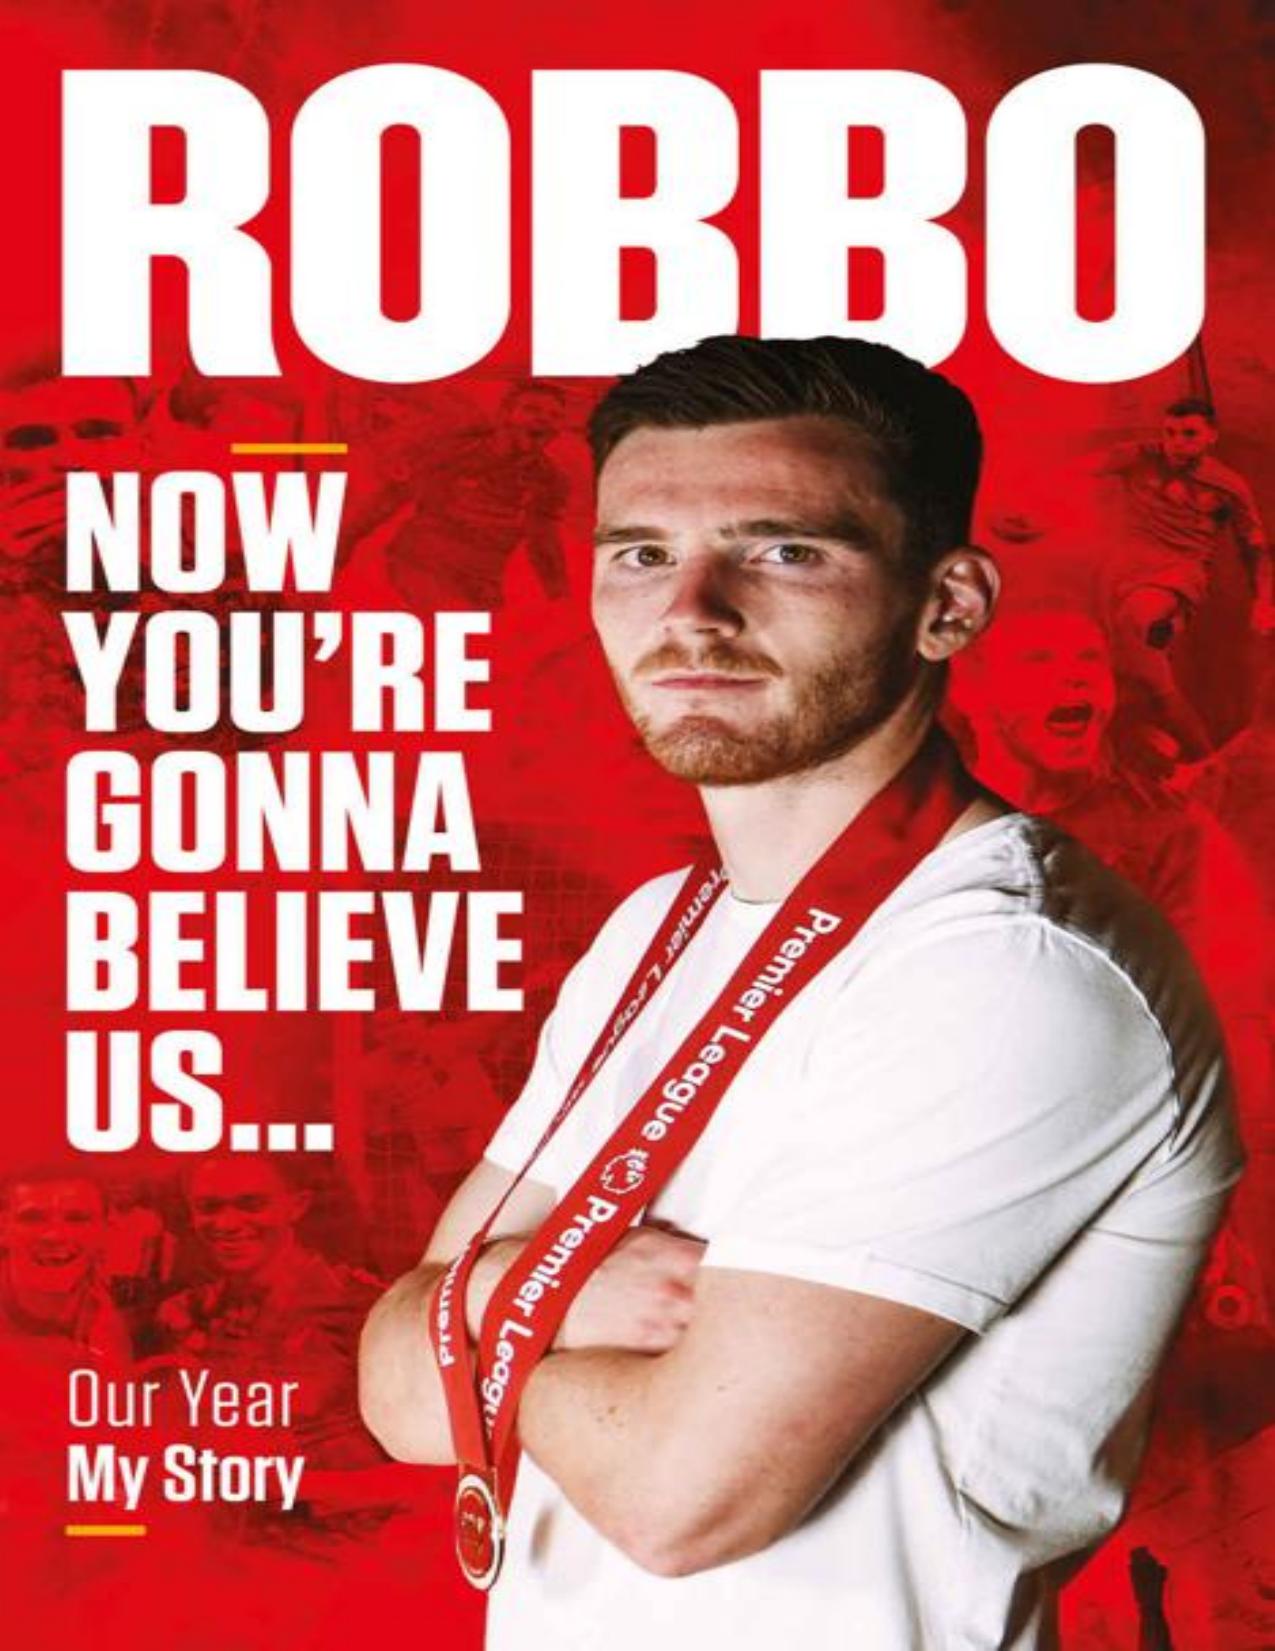 Robbo: Now You're Gonna Believe Us. Our Year, My Story